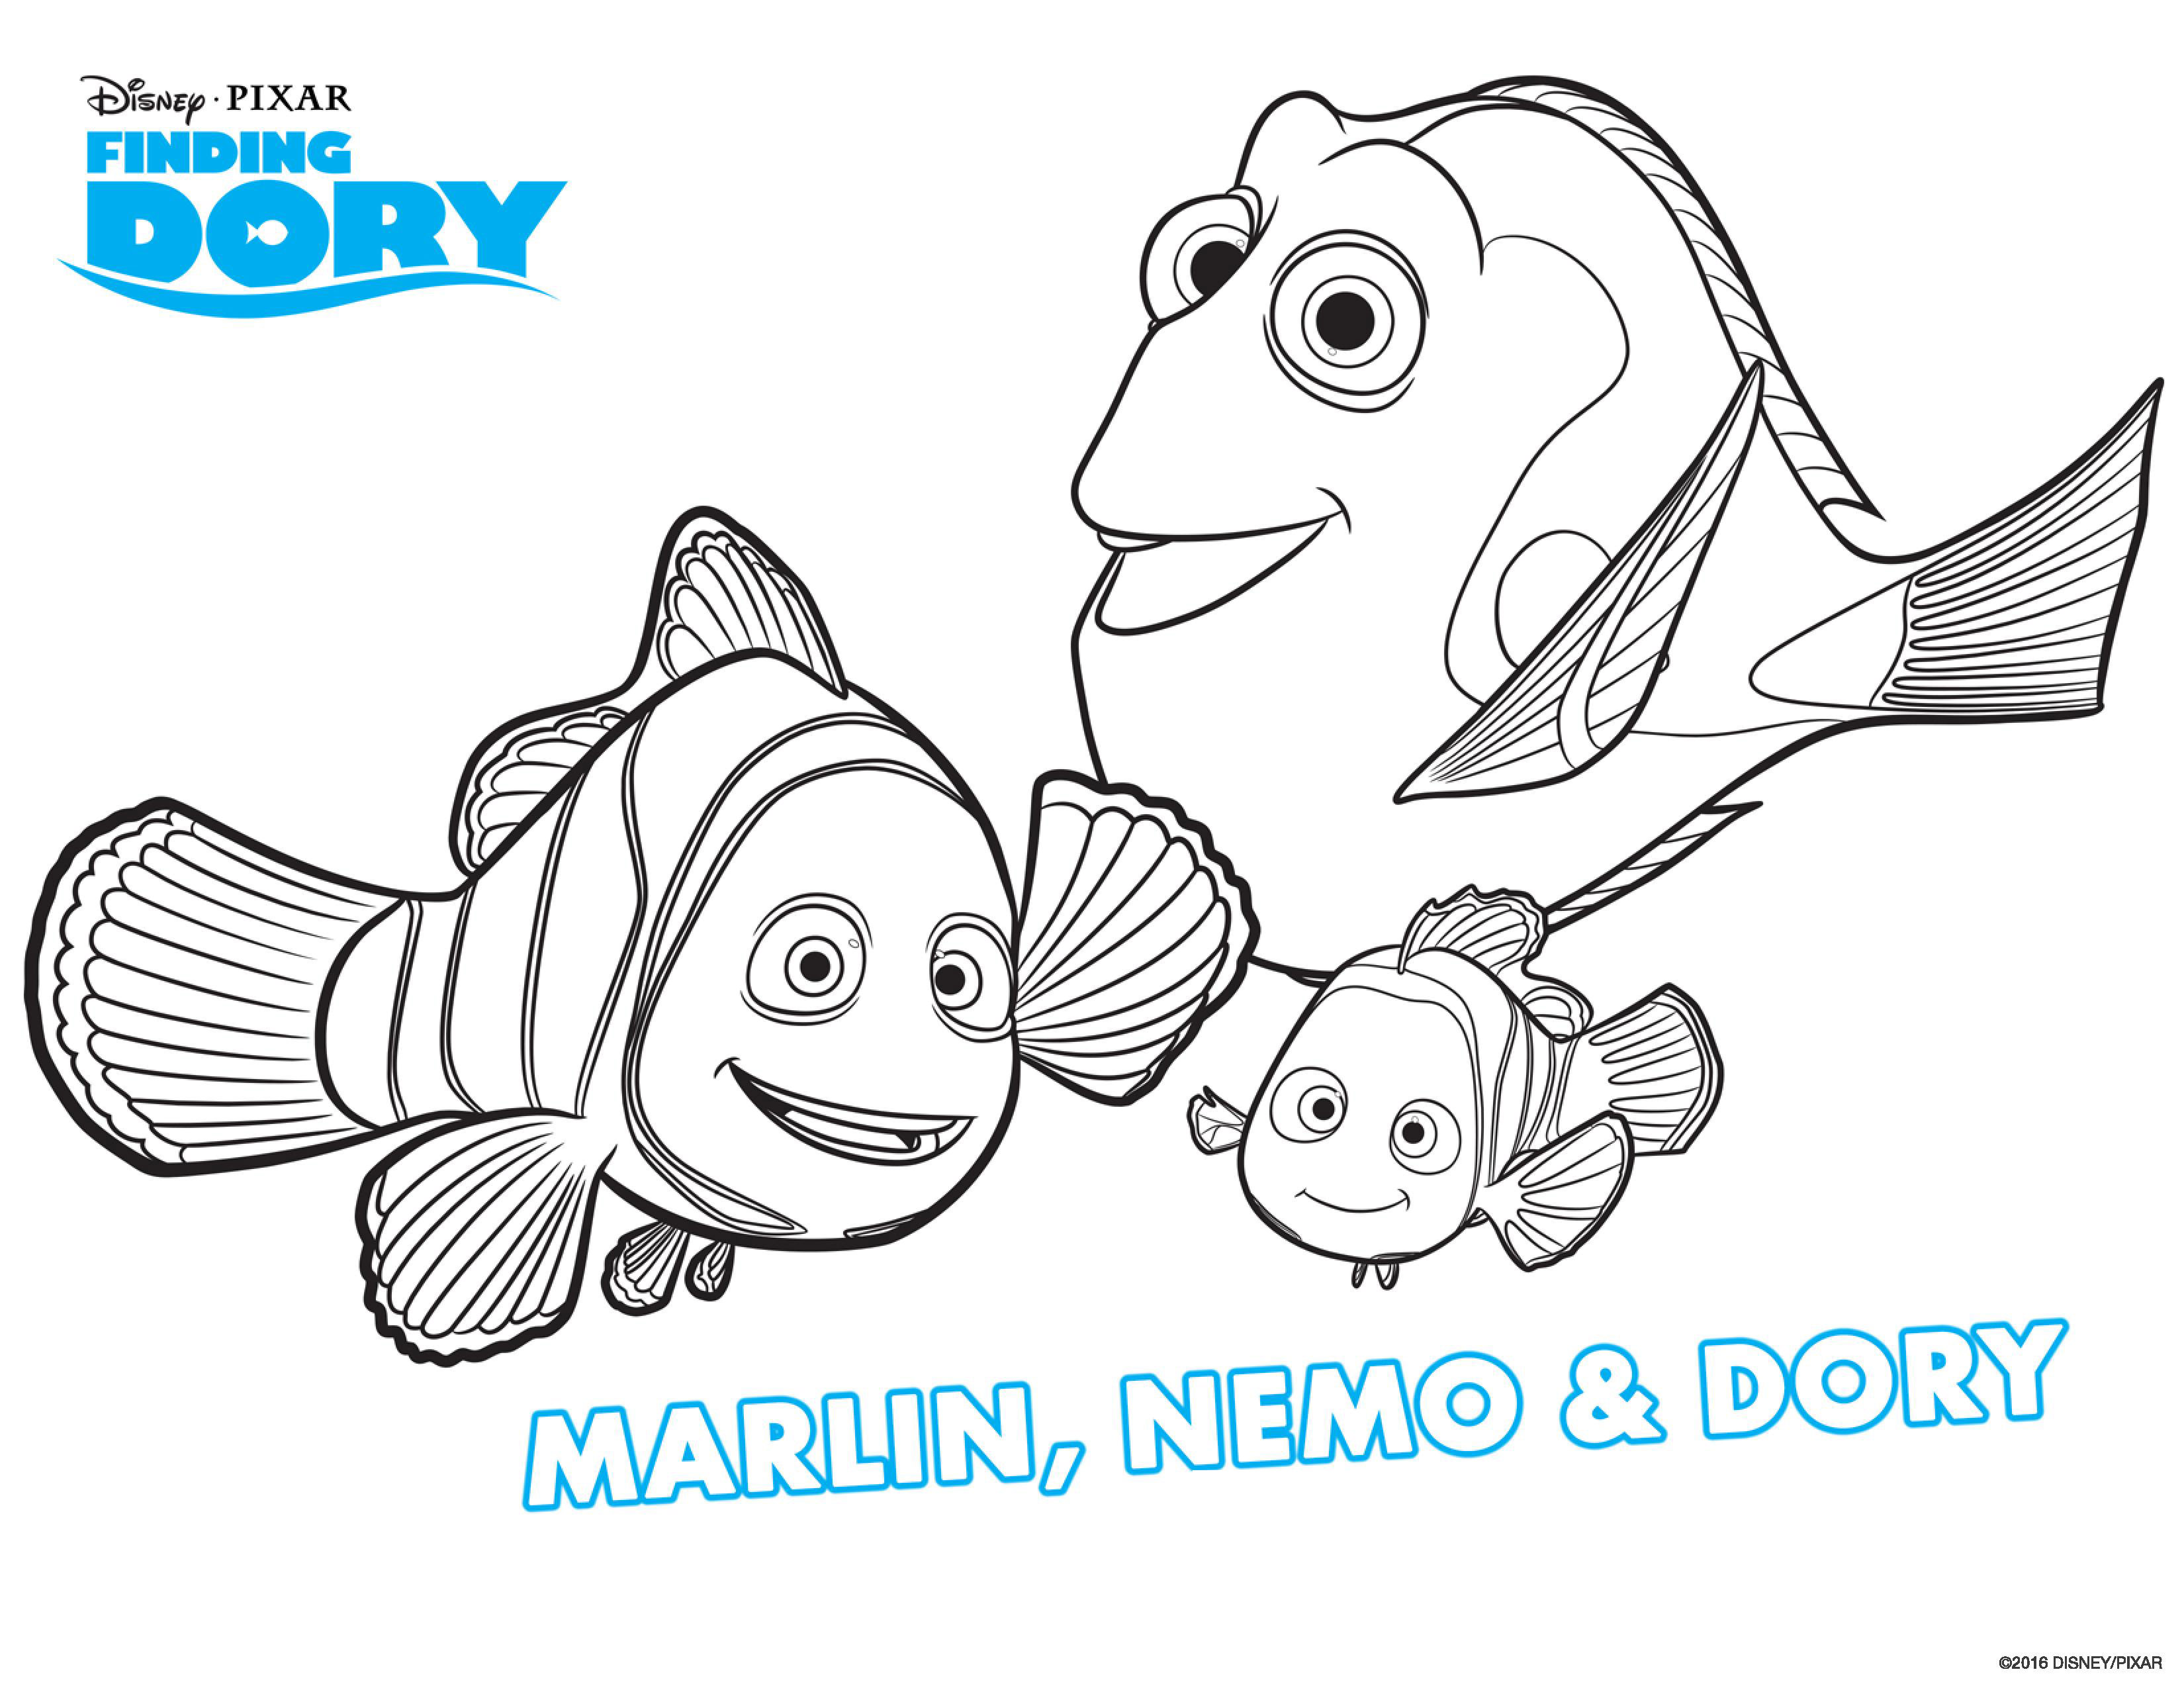 Finding Dory coloring page to print and color for free : Marlin, Nemo & Dory